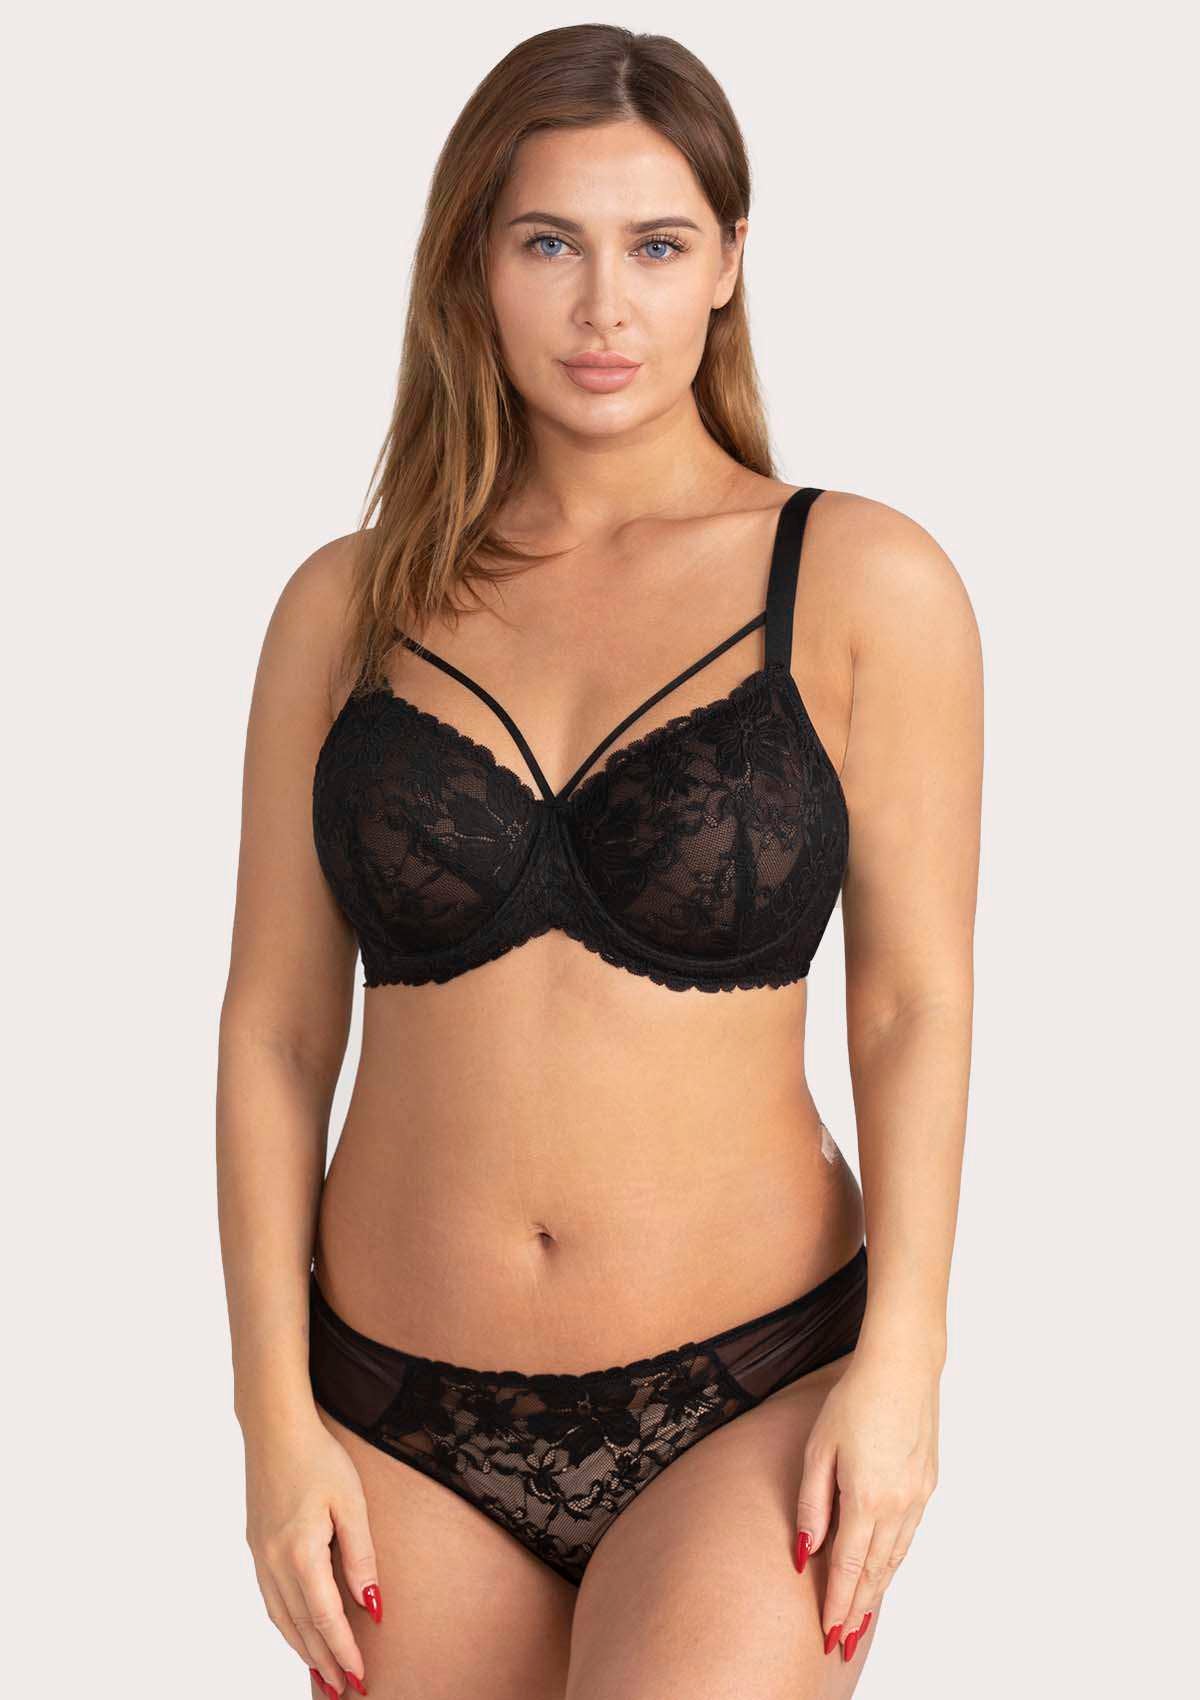 HSIA Pretty In Petals Lace Bra And Panty Set: Non Padded Wired Bra - Black / 40 / I